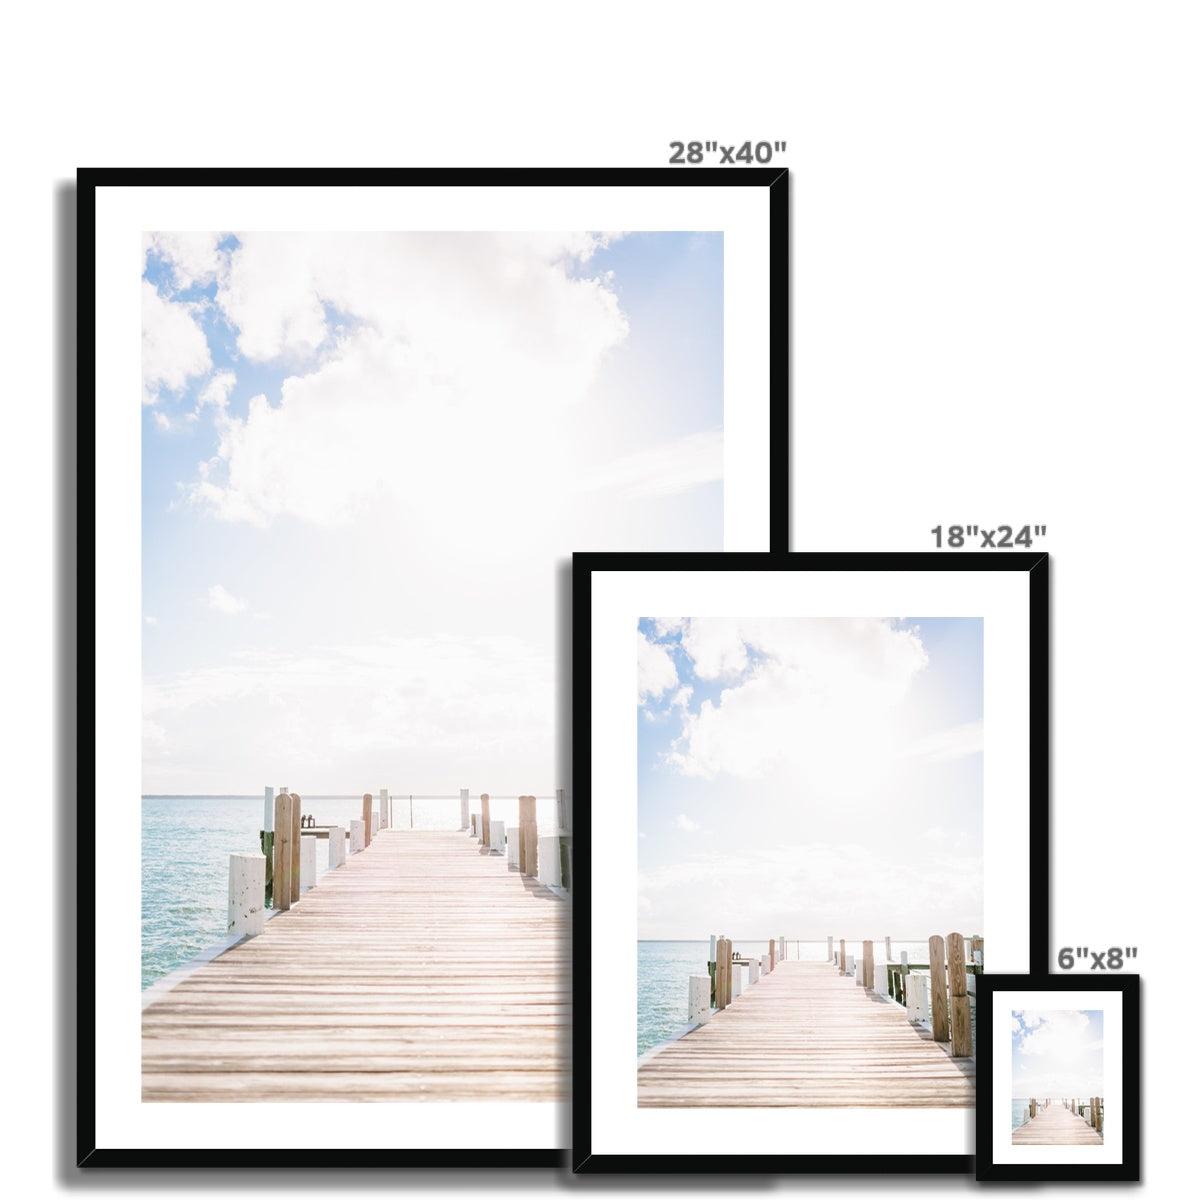 GREEN TURTLE CAY DOCK Framed & Mounted Print